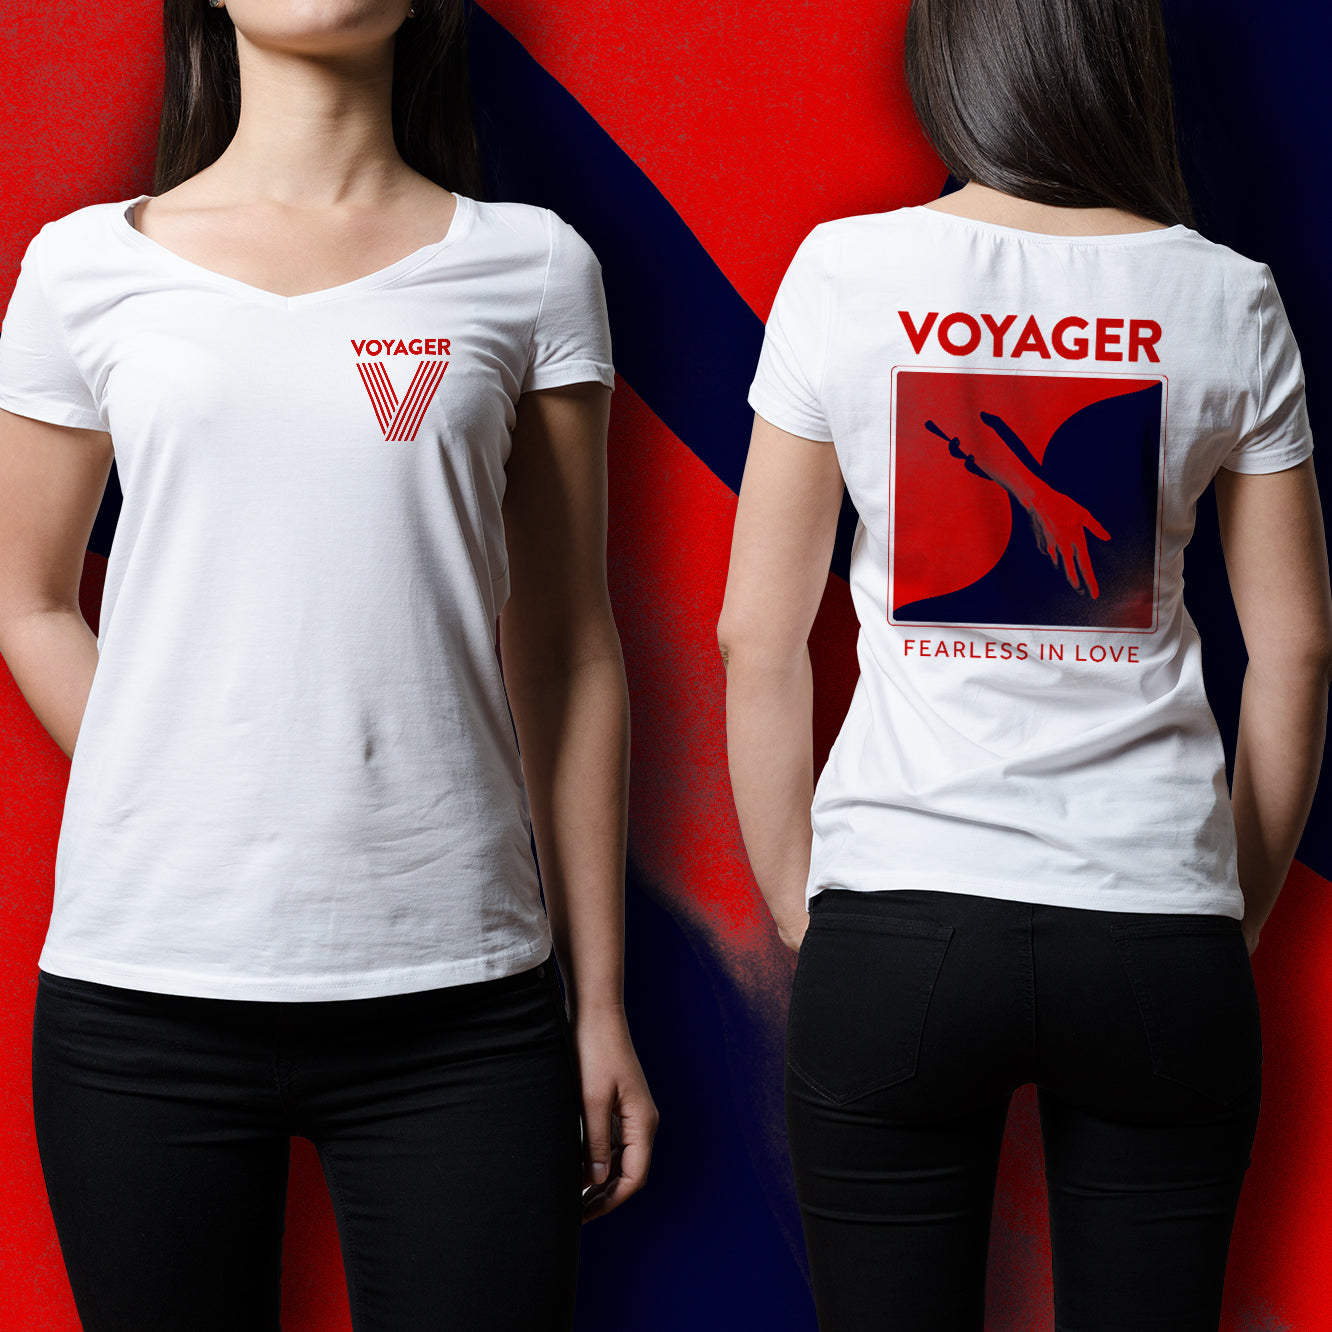 VOYAGER // FEARLESS IN LOVE - WOMEN'S RED T-SHIRT